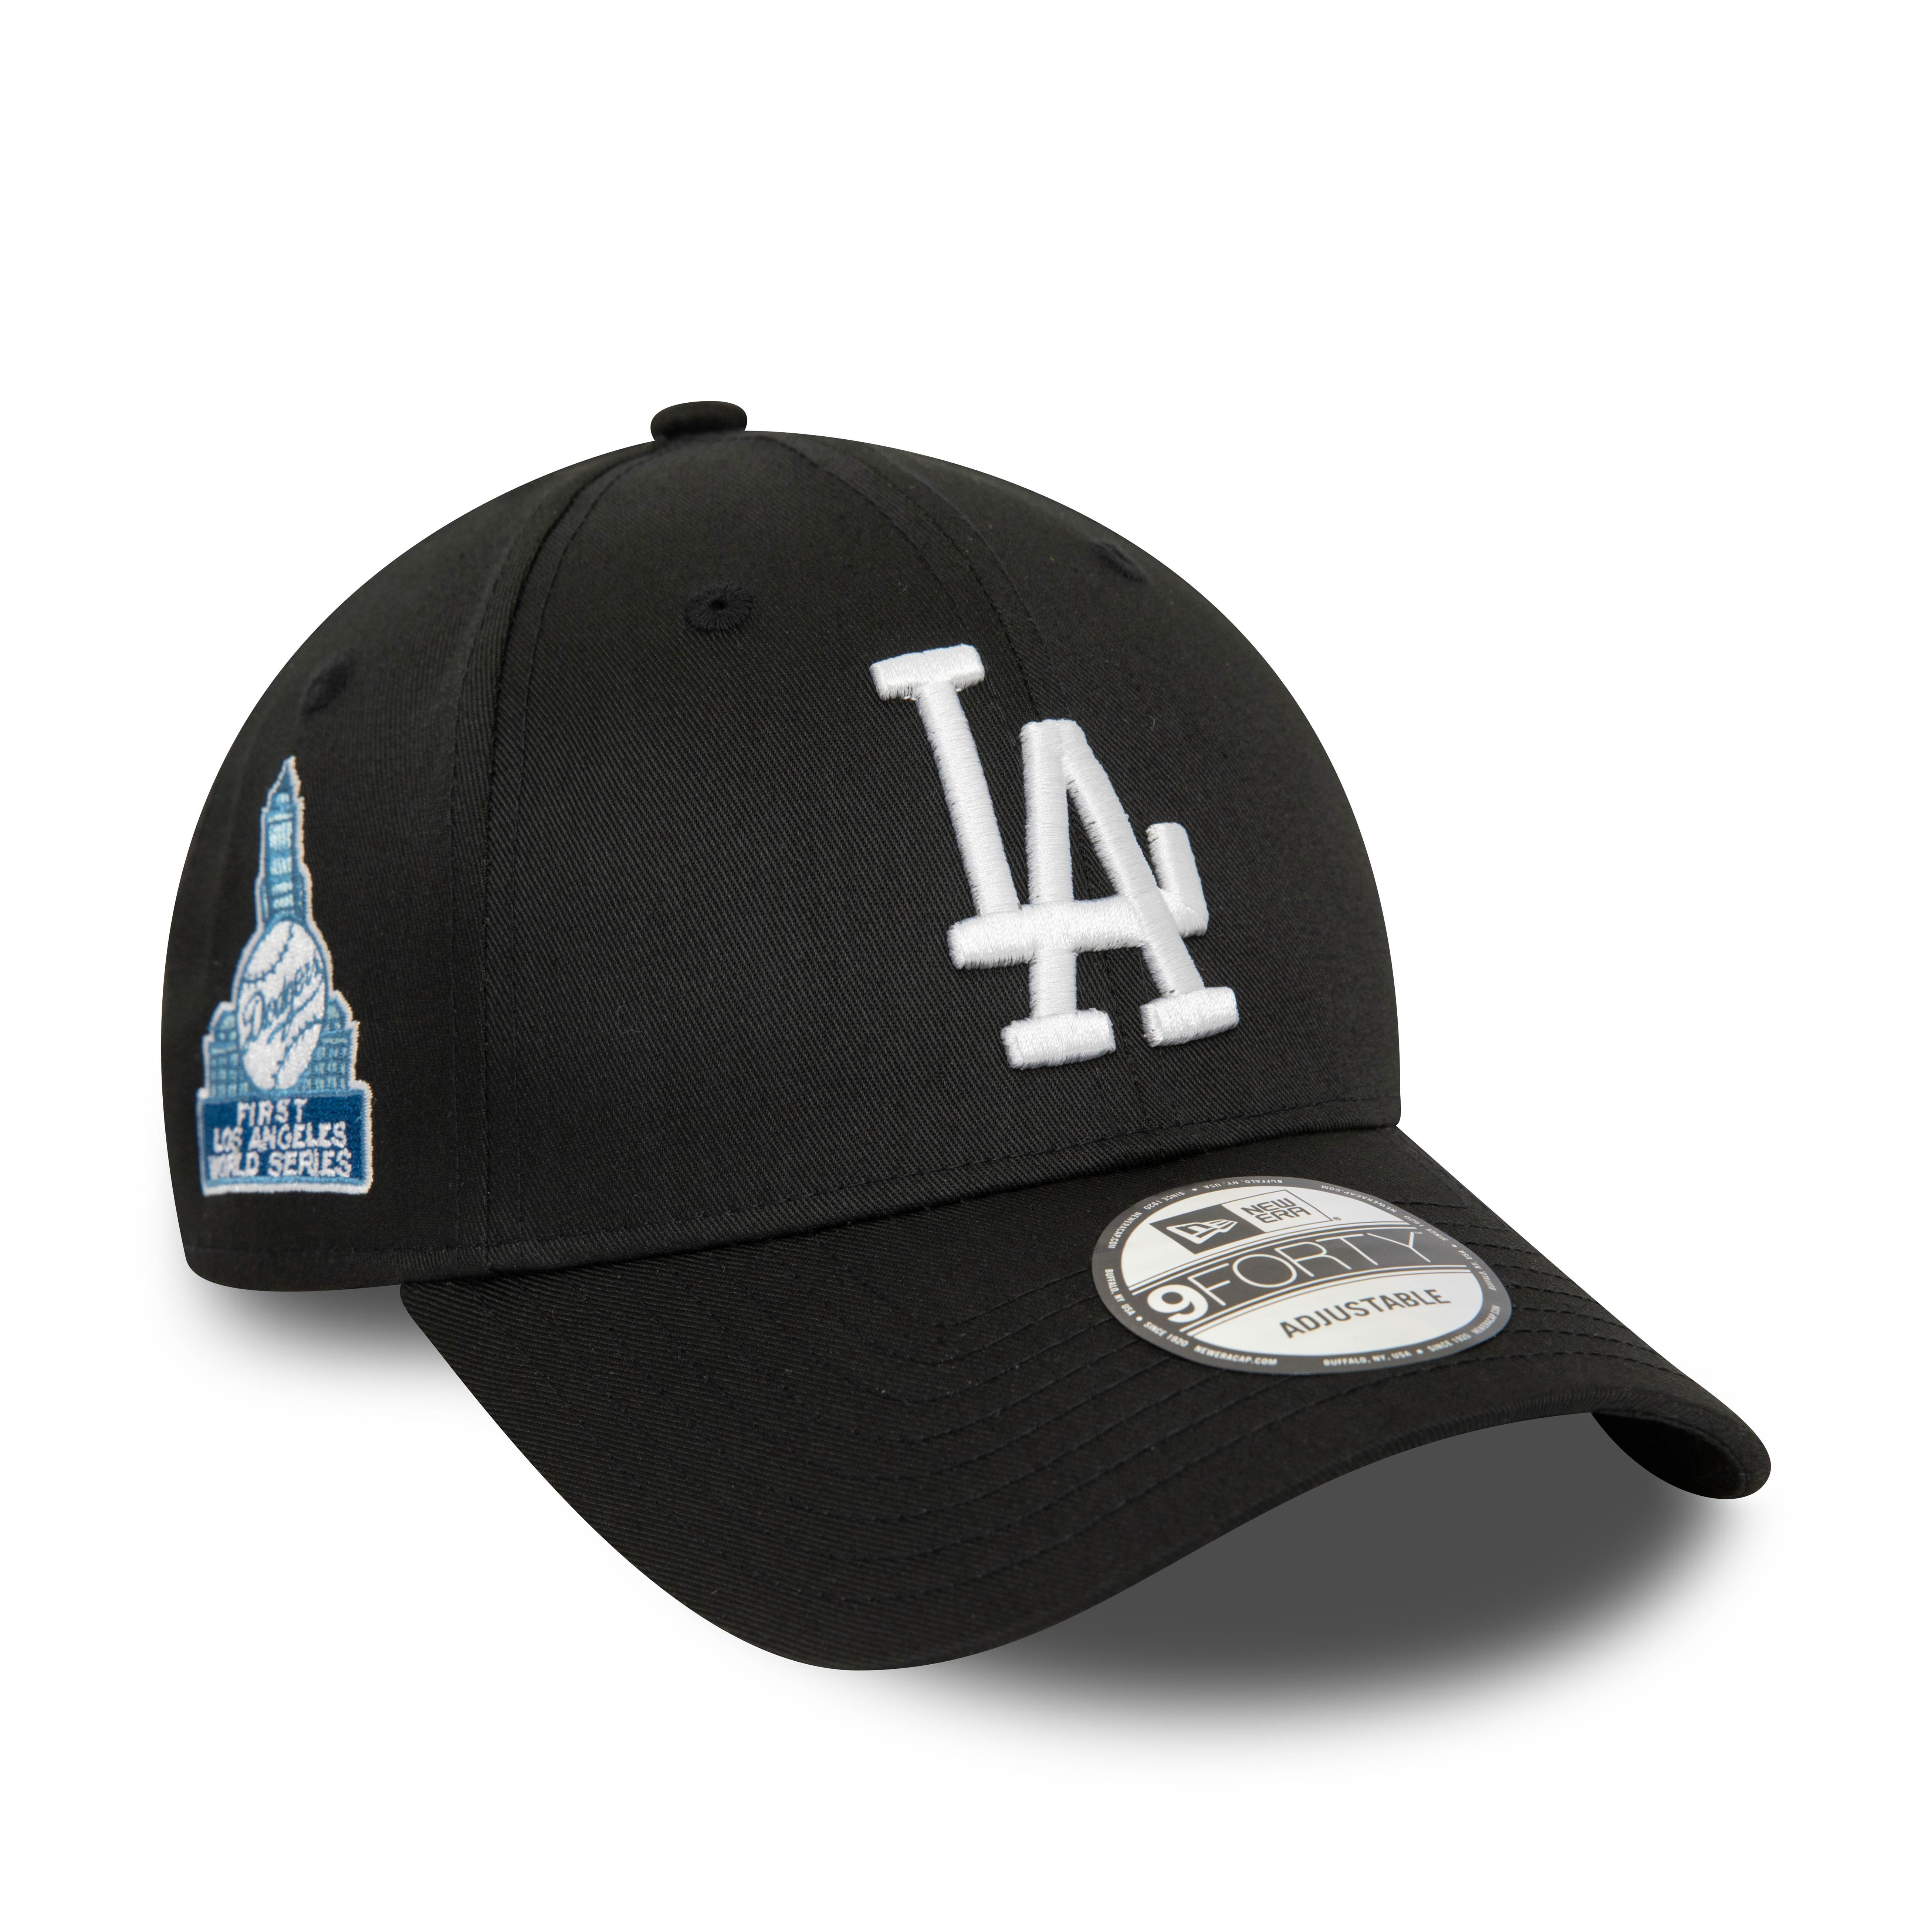 Los Angeles Dodgers MLB 1st World Series Sidepatch Black 9Forty Adjustable Cap New Era